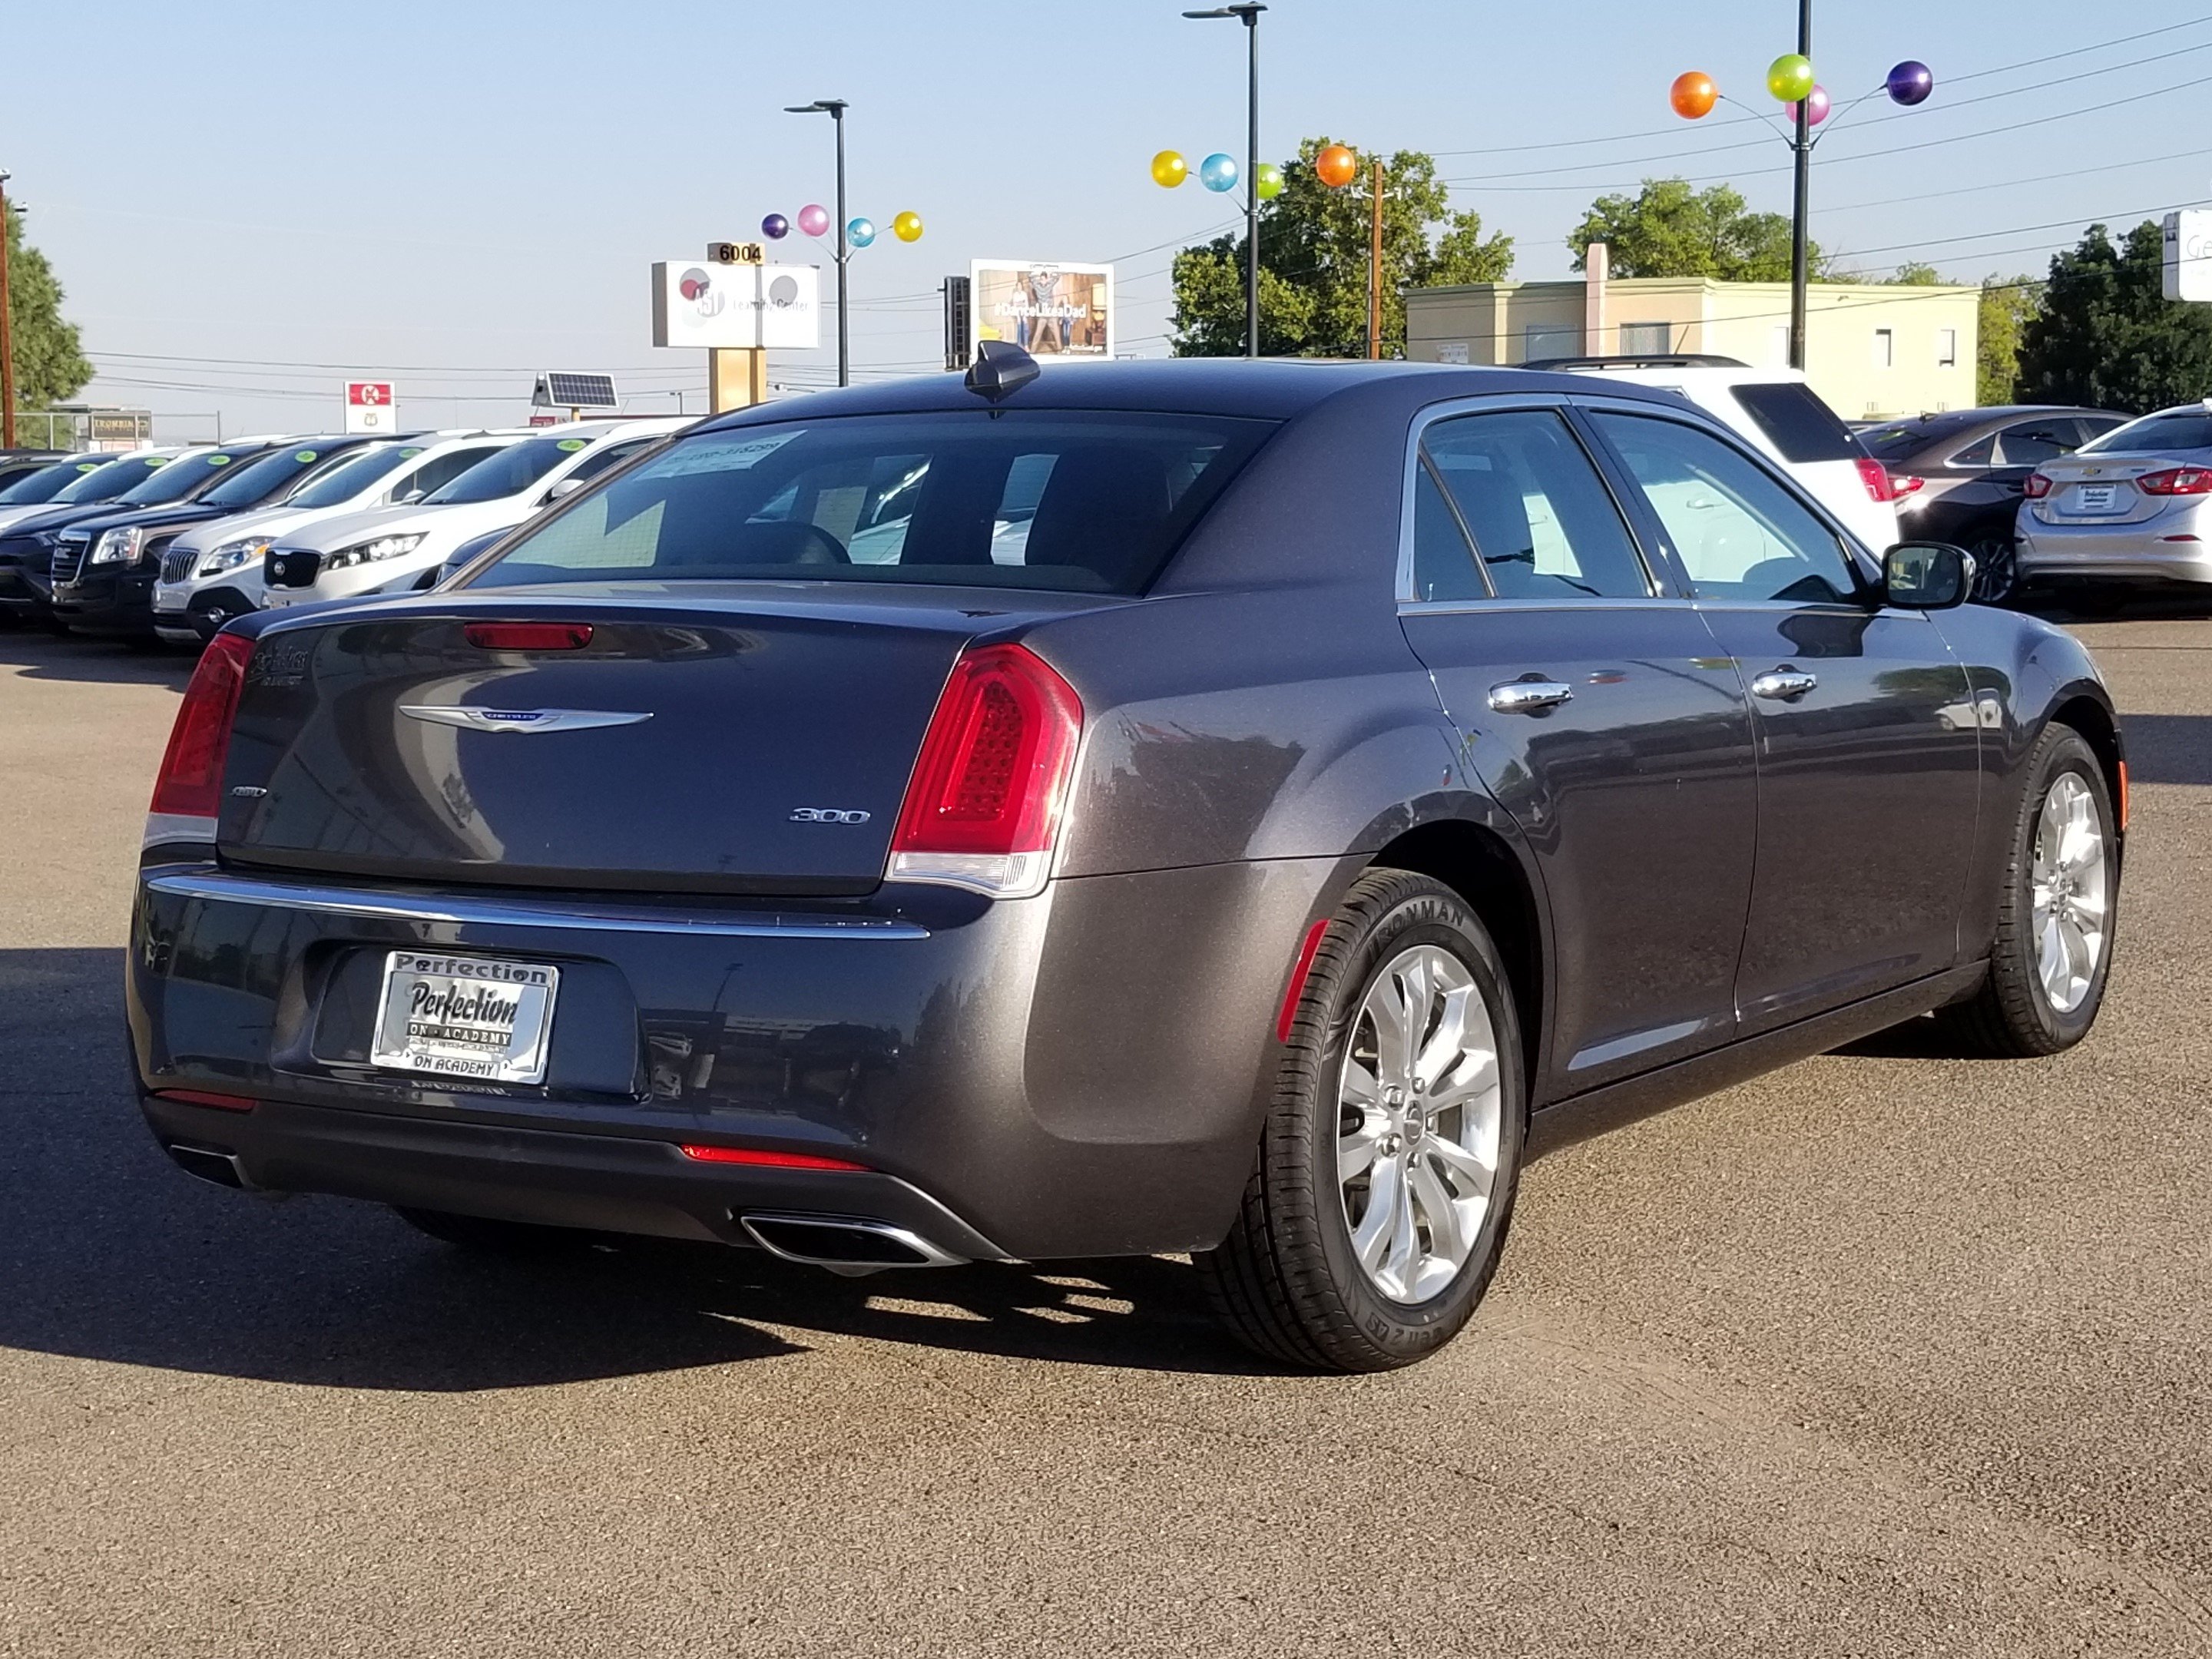 PreOwned 2018 Chrysler 300 Limited 4dr Car in Albuquerque